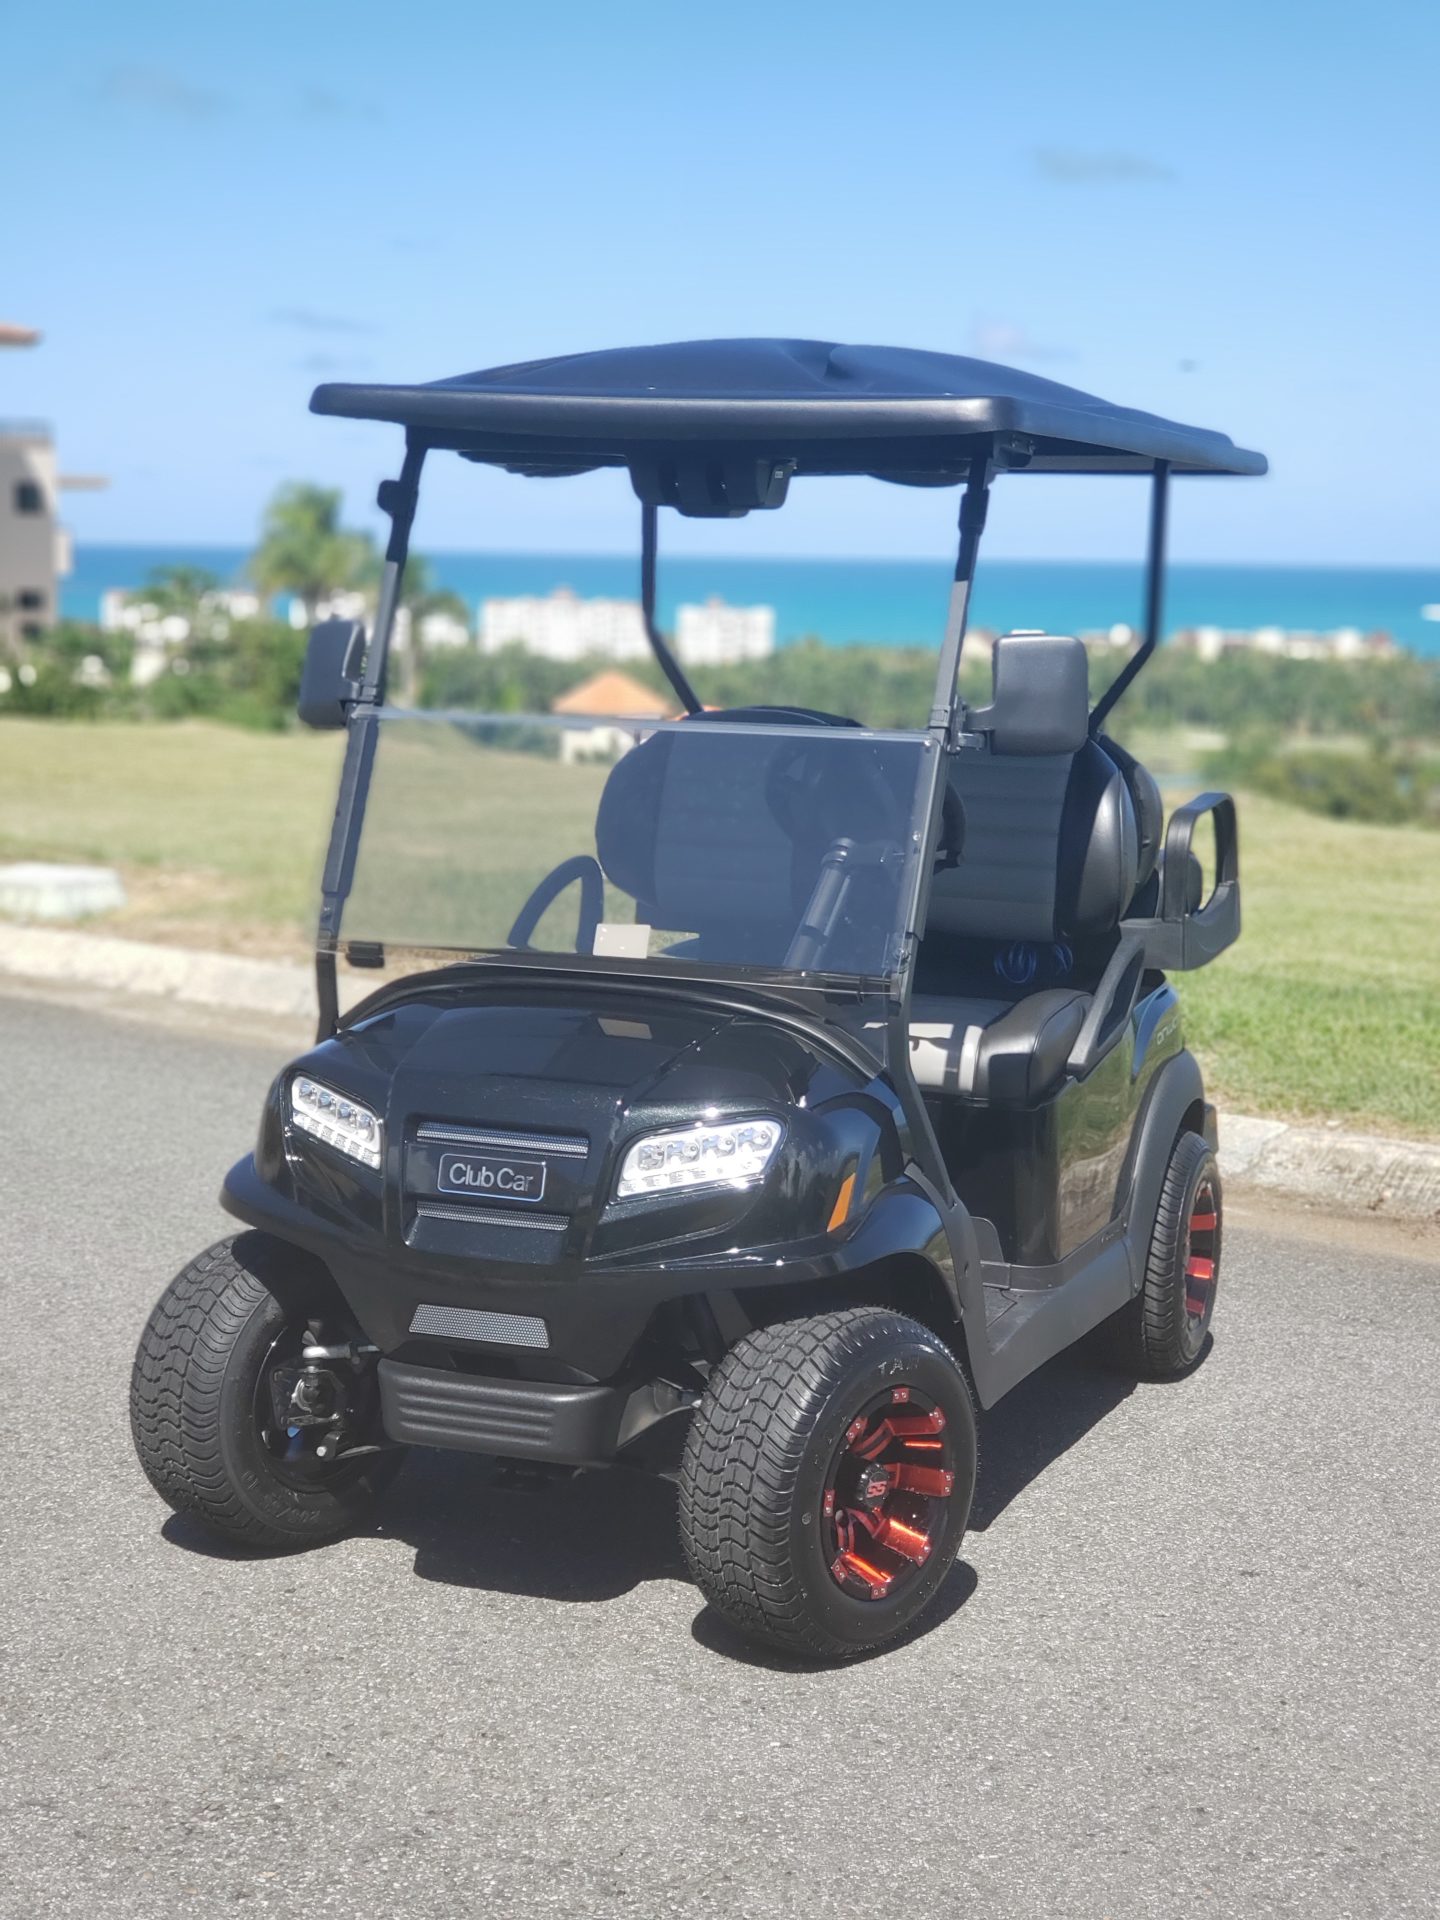 a black golf cart parked on a road